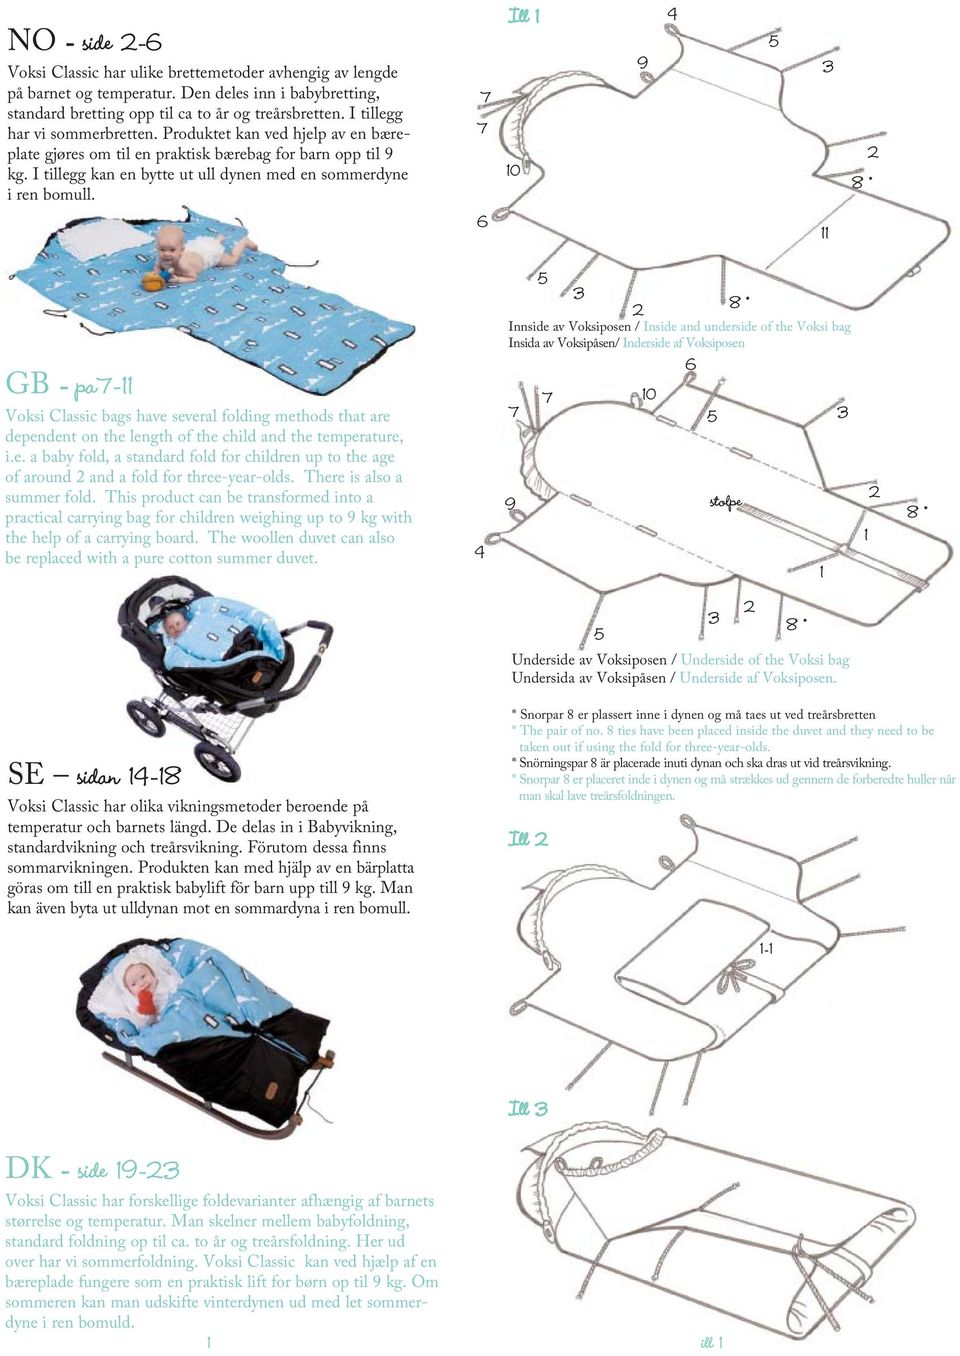 7 7 6 Ill 1 10 9 4 5 3 11 8* 2 GB - pa7-11 Voksi Classic bags have several folding methods that are dependent on the length of the child and the temperature, i.e. a baby fold, a standard fold for children up to the age of around 2 and a fold for three-year-olds.